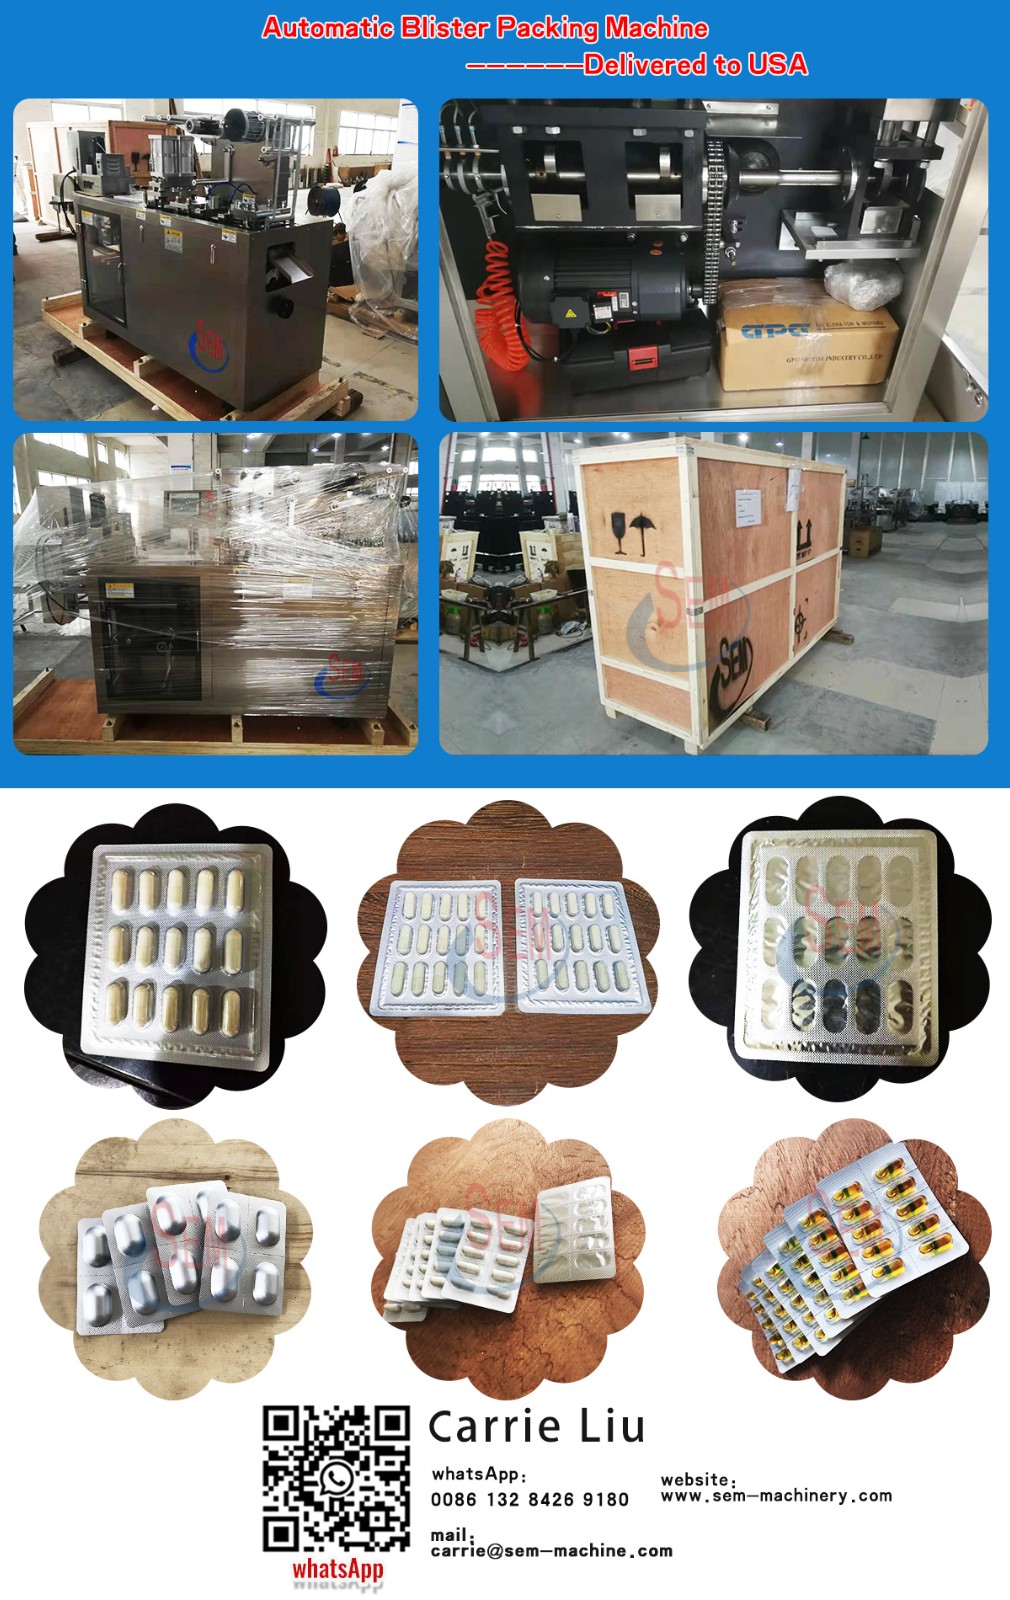 Automatic blister packing machine—delivered to USA